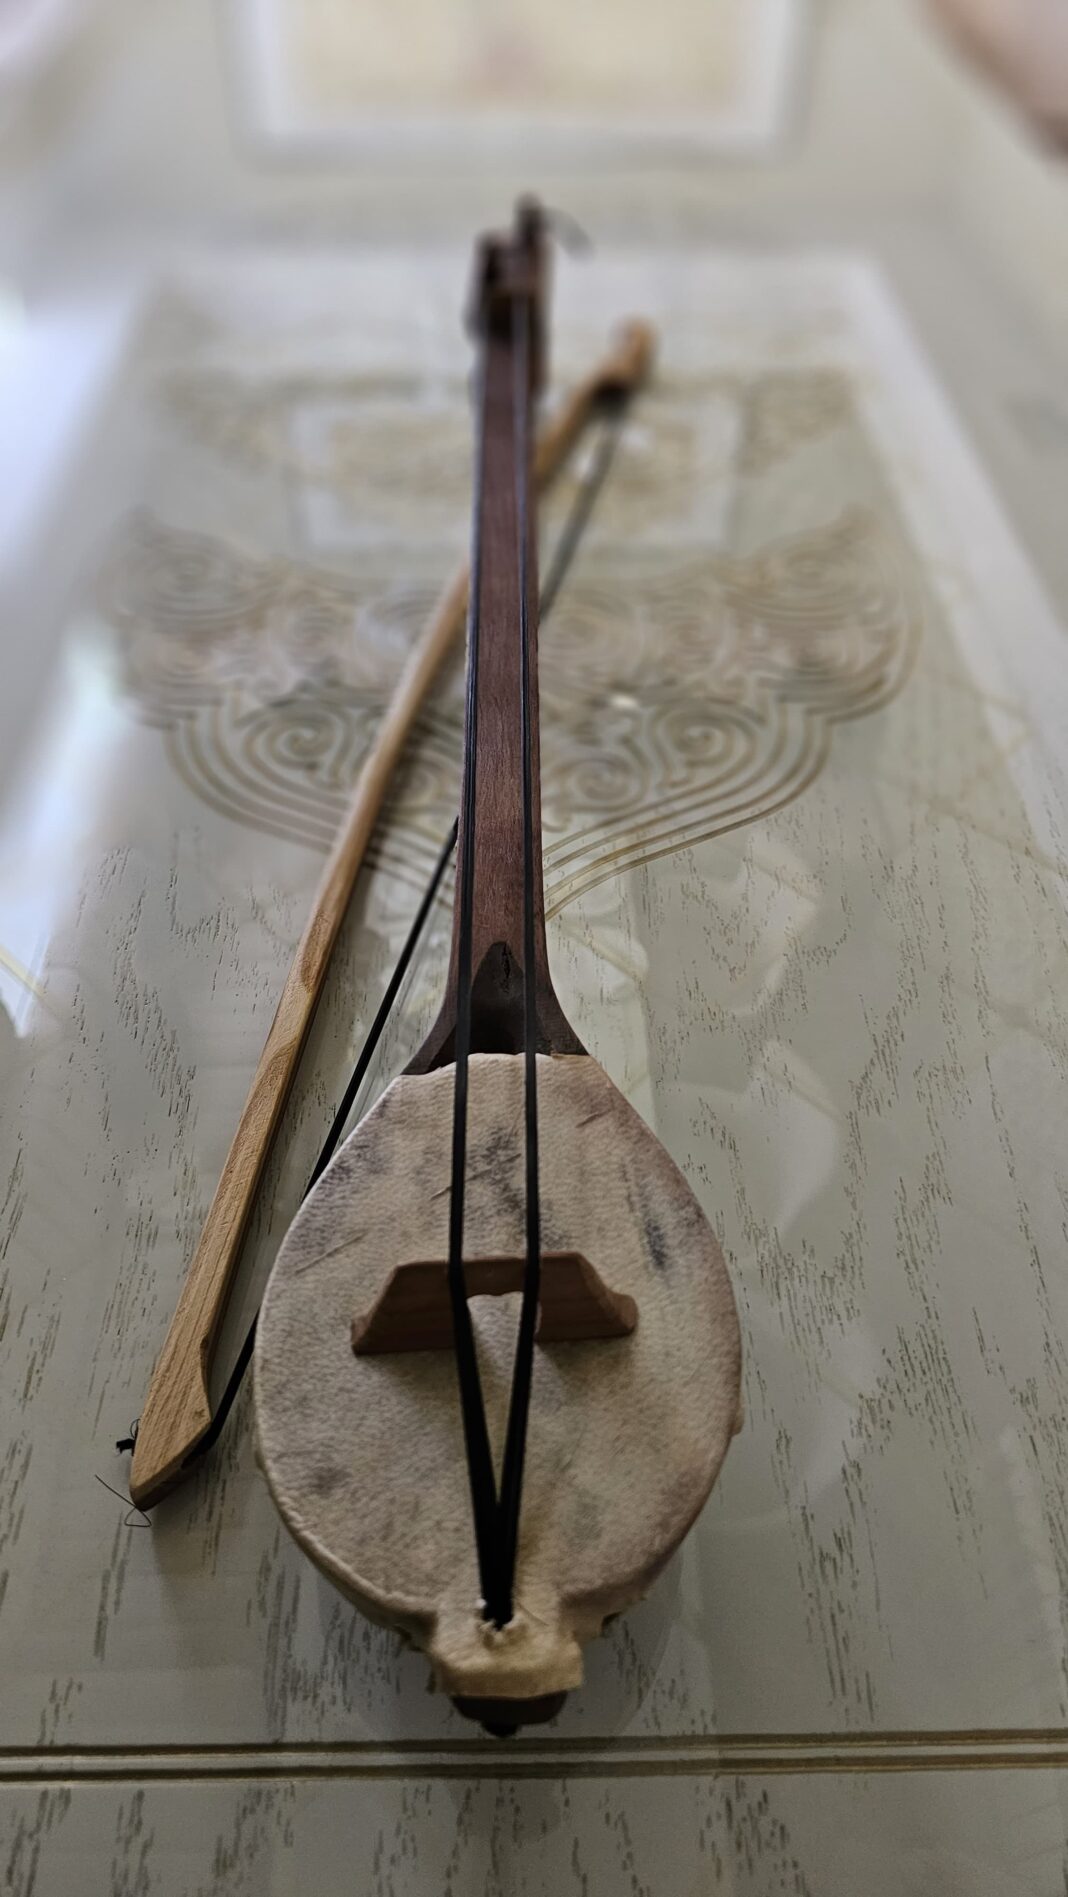 Dimash Qudaibergen received a scientific copy of the most ancient kobyz - symbol of the musical heritage of the Turkic world